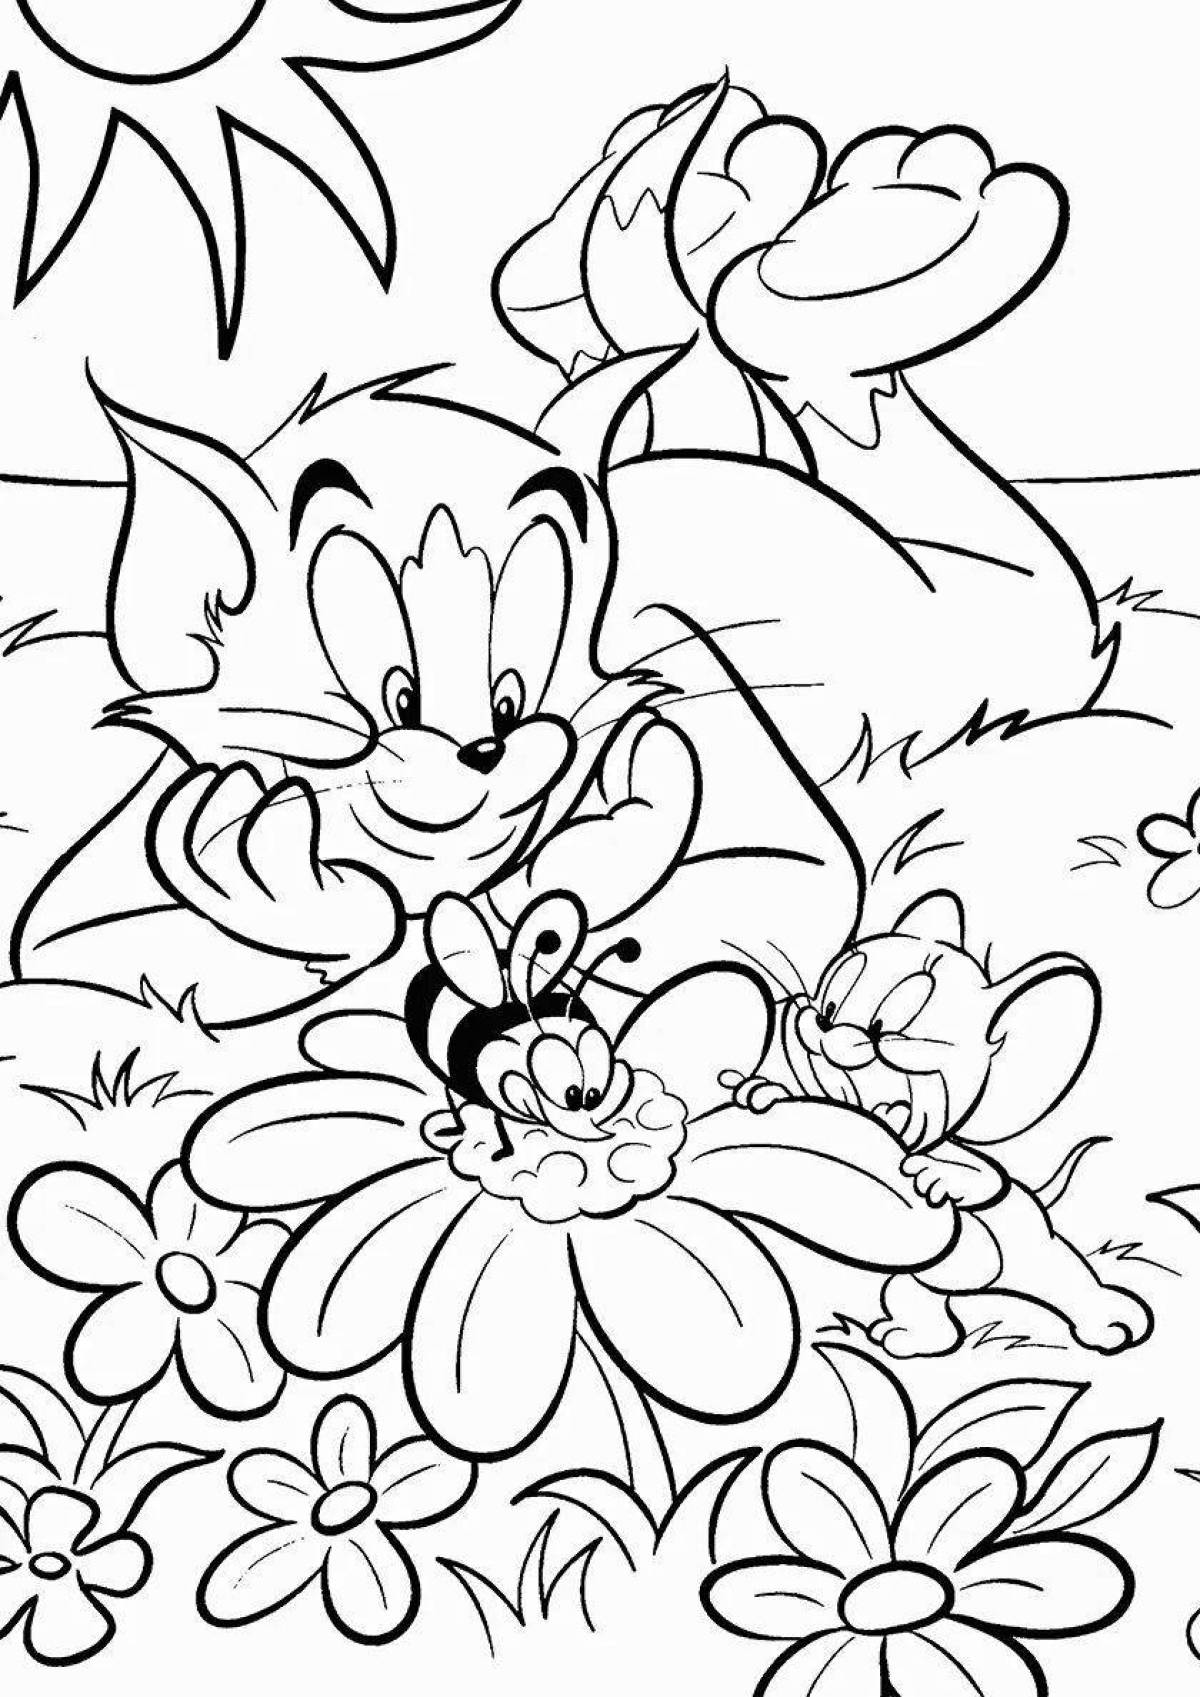 Bright tom and jerry coloring book